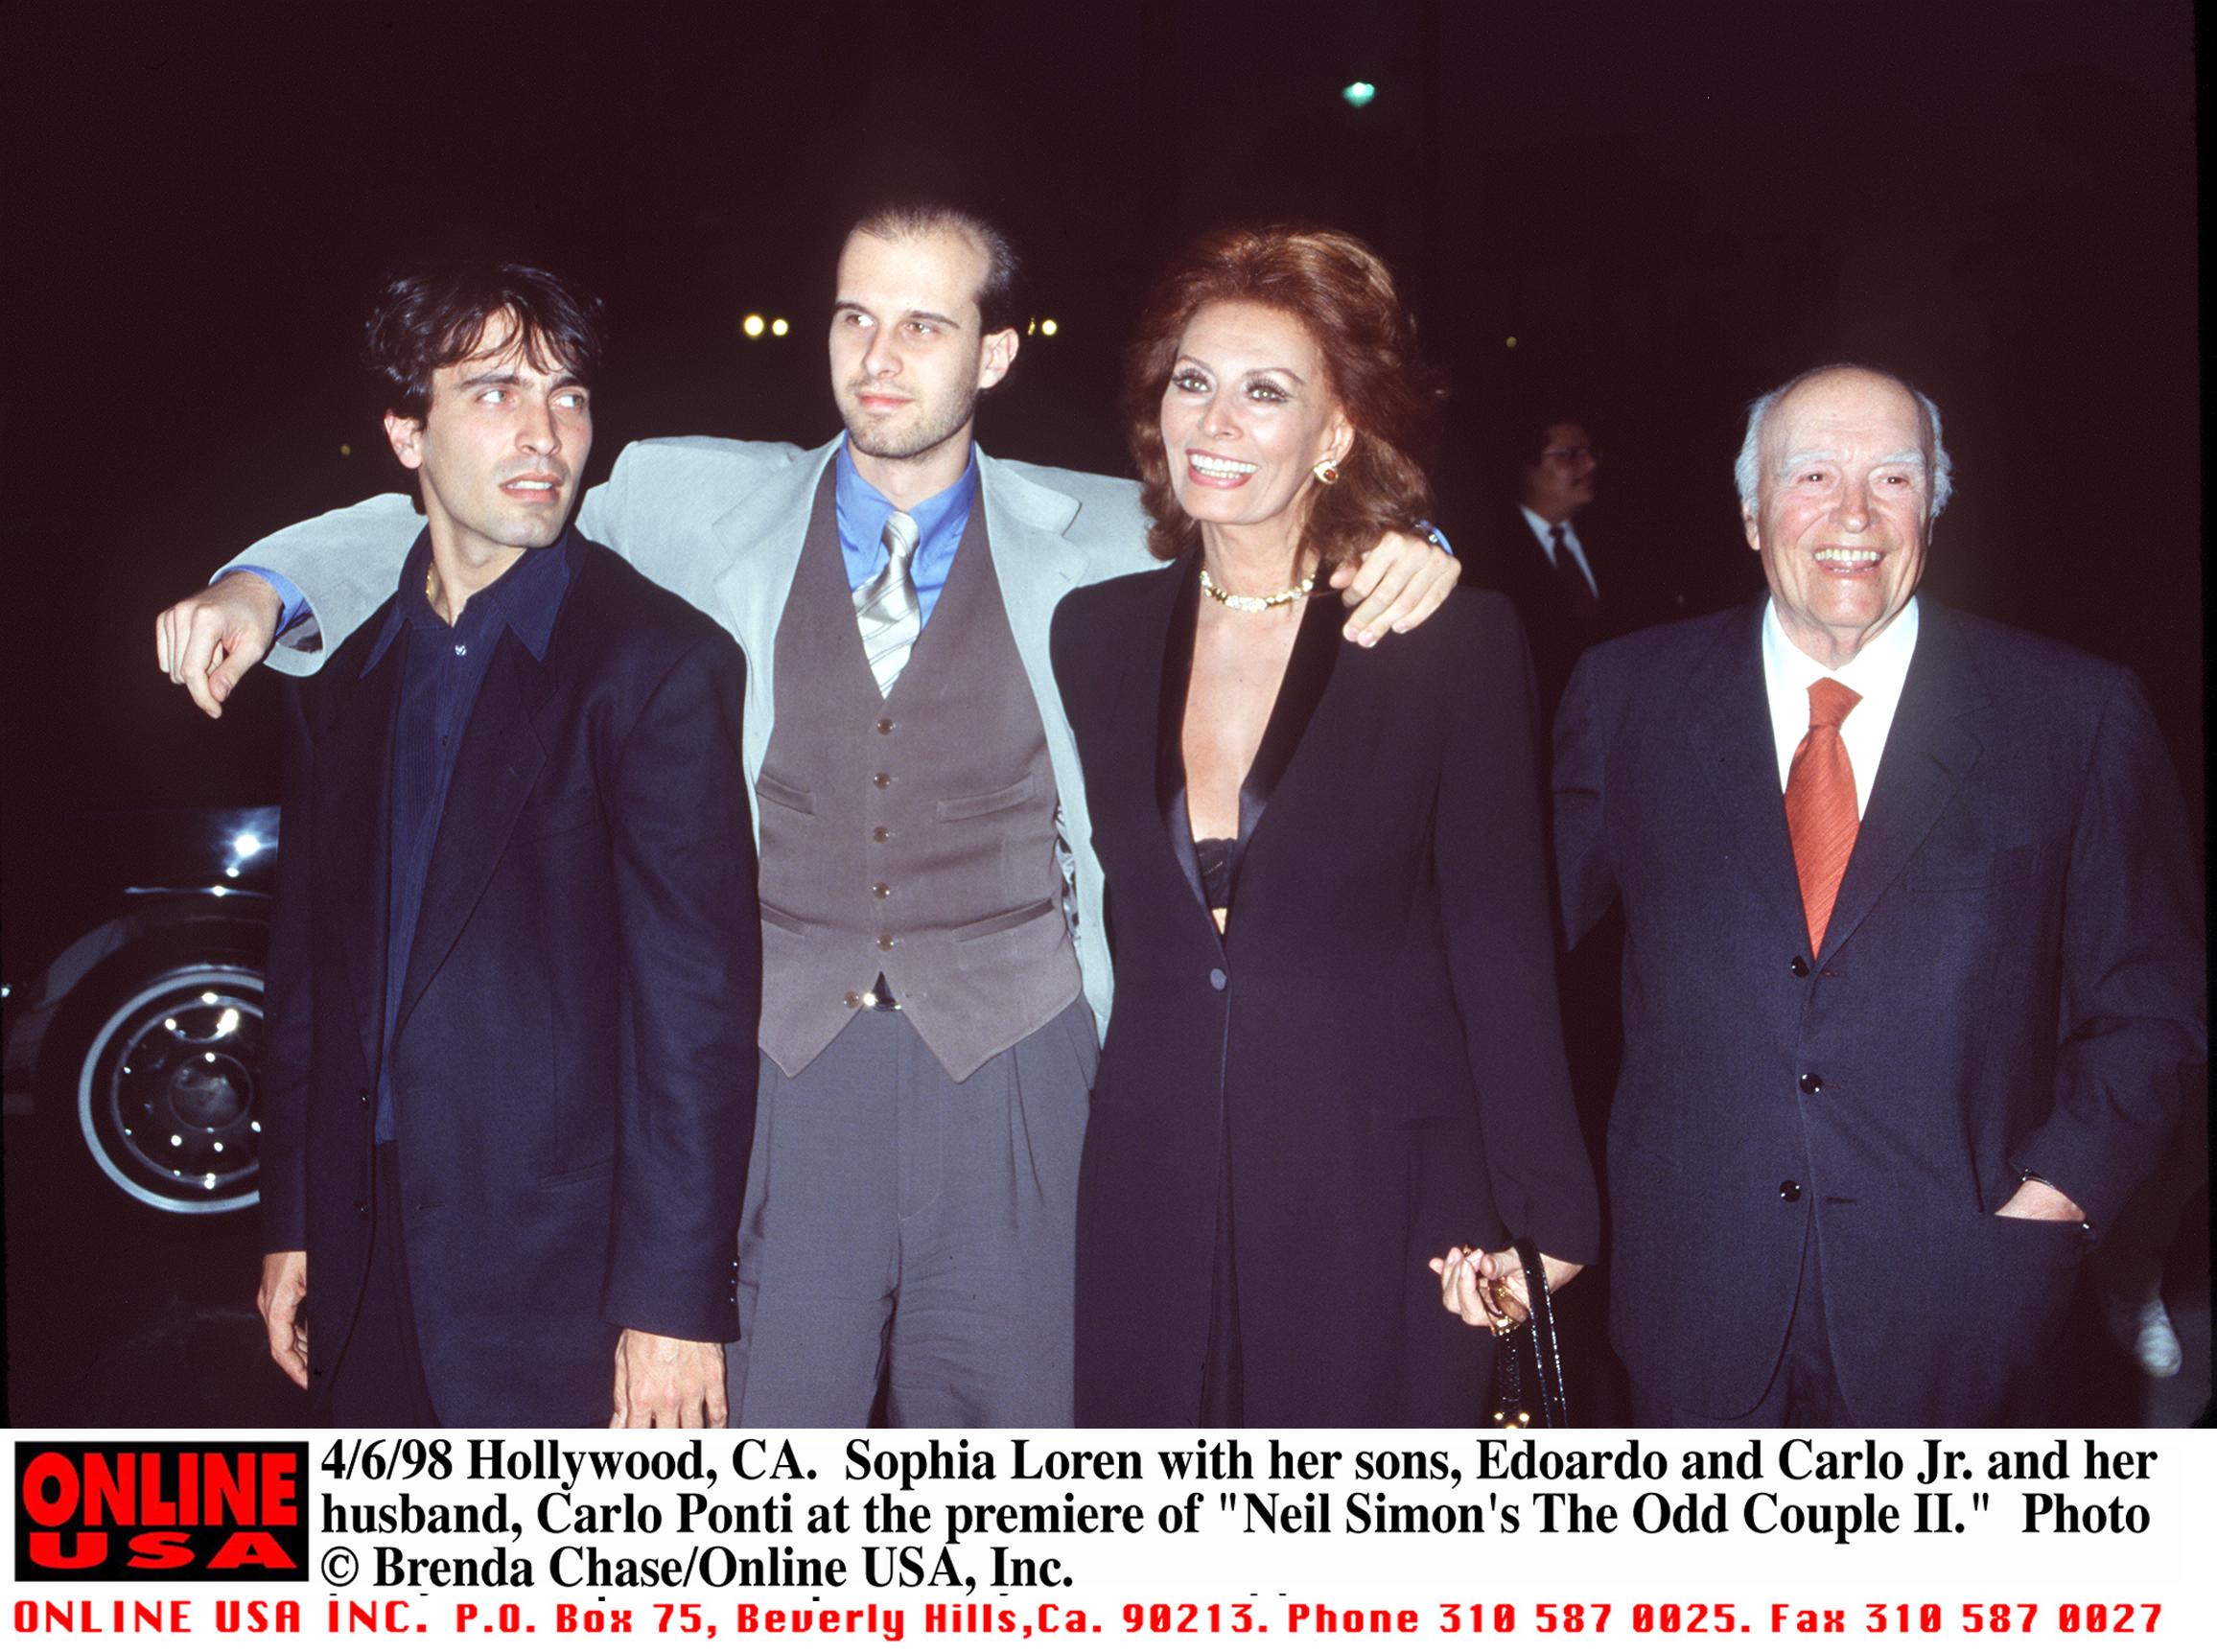 Sophia Loren, Edoardo and Carlo Jr., and Carlo Ponti Sr. at the premiere of "Neil Simon's The Odd Couple II" on April 6, 1998, in Hollywood, California. | Source: Brenda Chase/Online USA, Inc/Getty Images